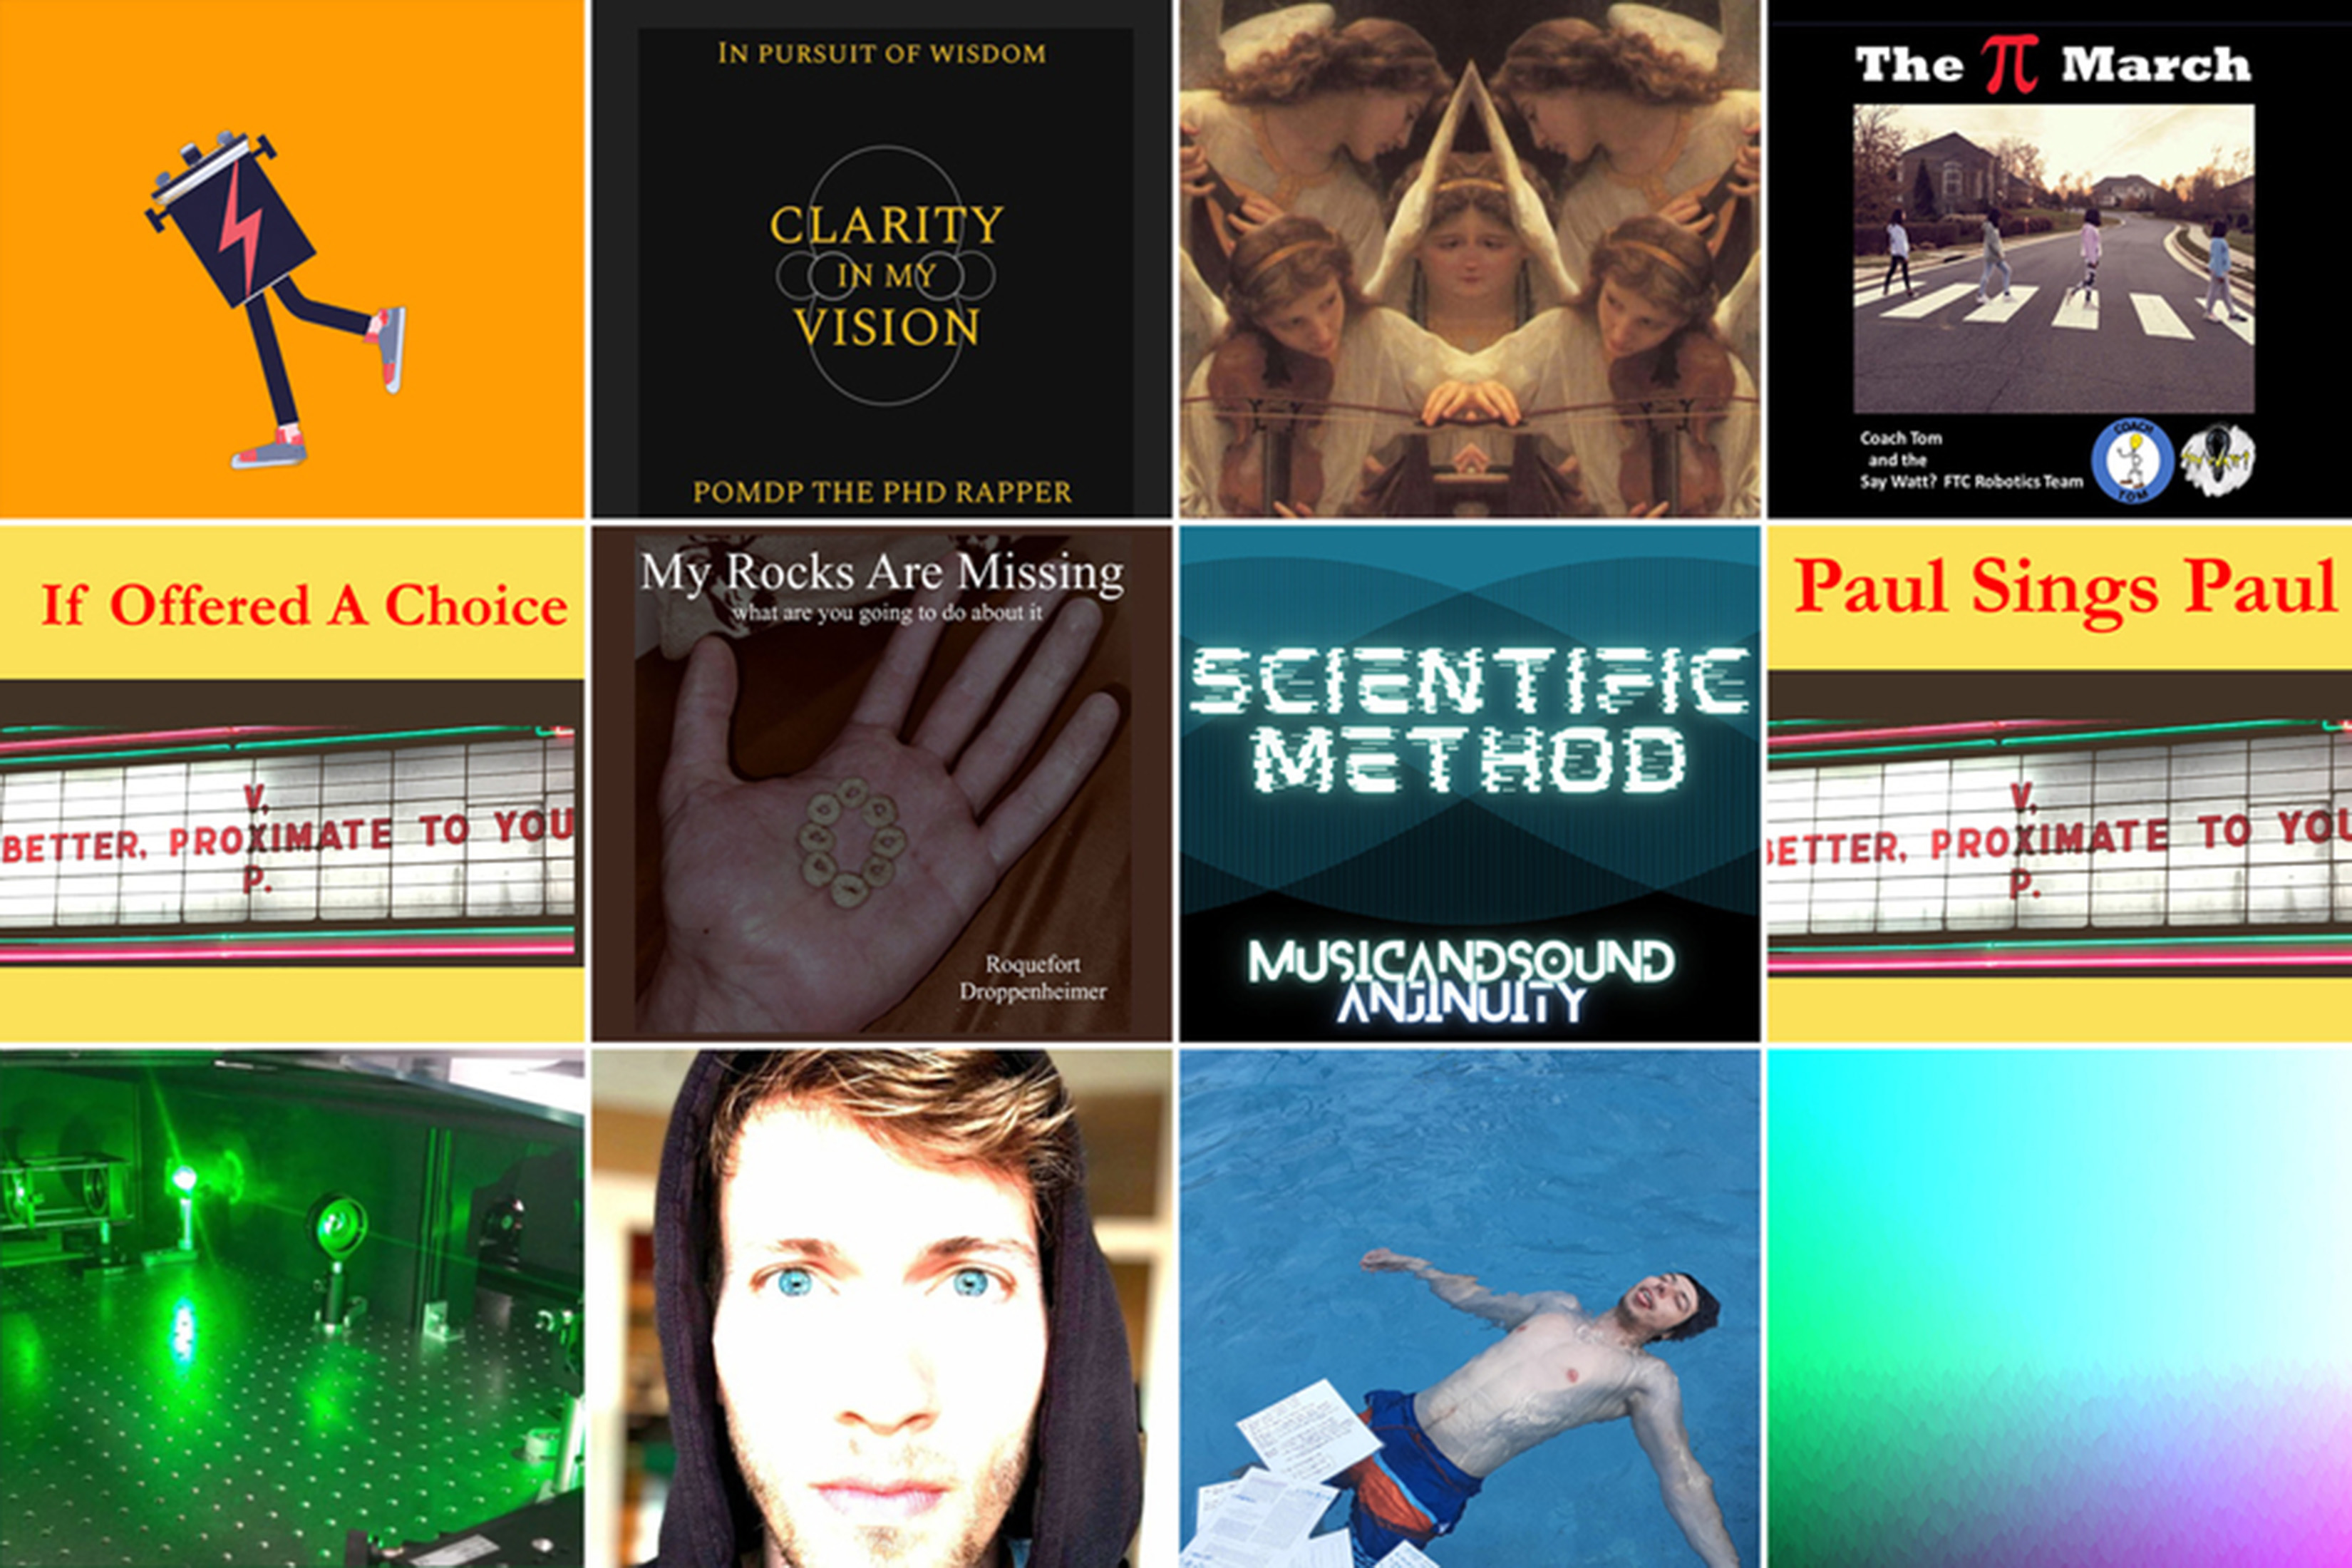 12 album covers arranged in a 4x3 grid. They feature images like a walking battery, green lasers, 4 people walking on a crosswalk like The Beatles’ Abbey Road, and a man floating in a pool. Some of the titles for the songs include: Clarity in my Vision; The Pi March; If Offered a Choice; My Rocks are Missing; Scientific Method; and Paul Sings Paul.